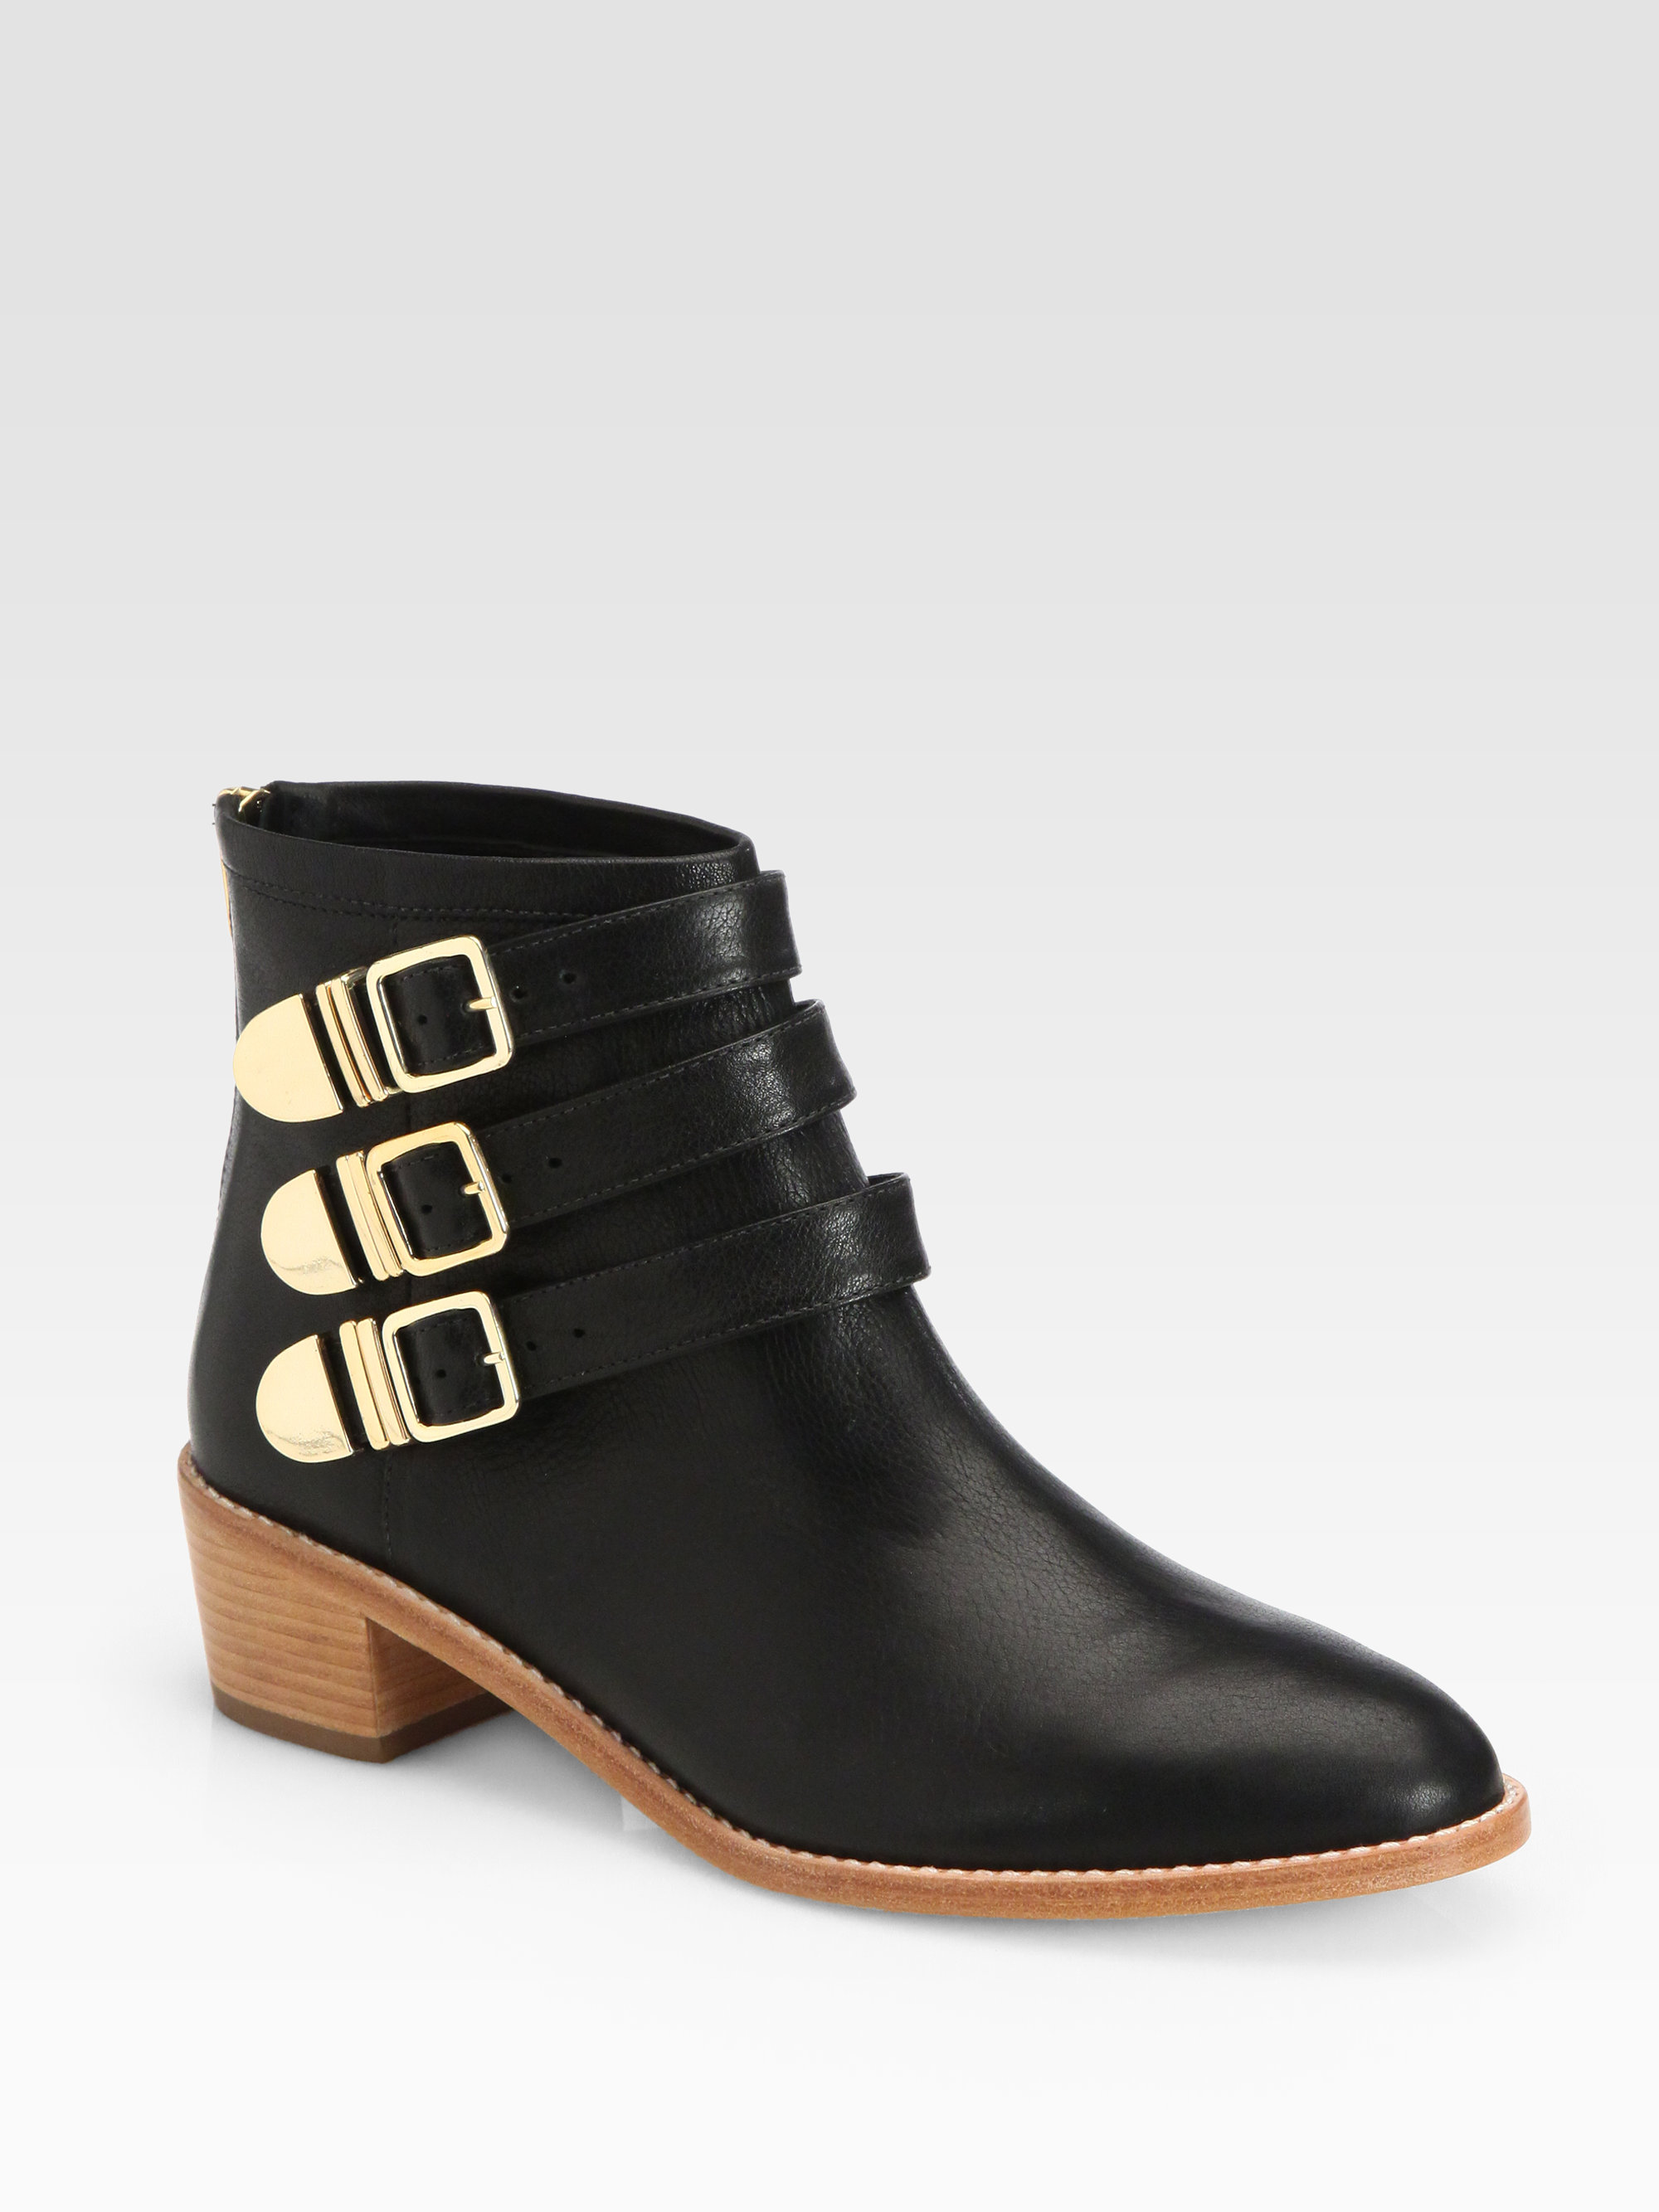 Loeffler Randall Fenton Leather Buckle Ankle Boots in Black | Lyst